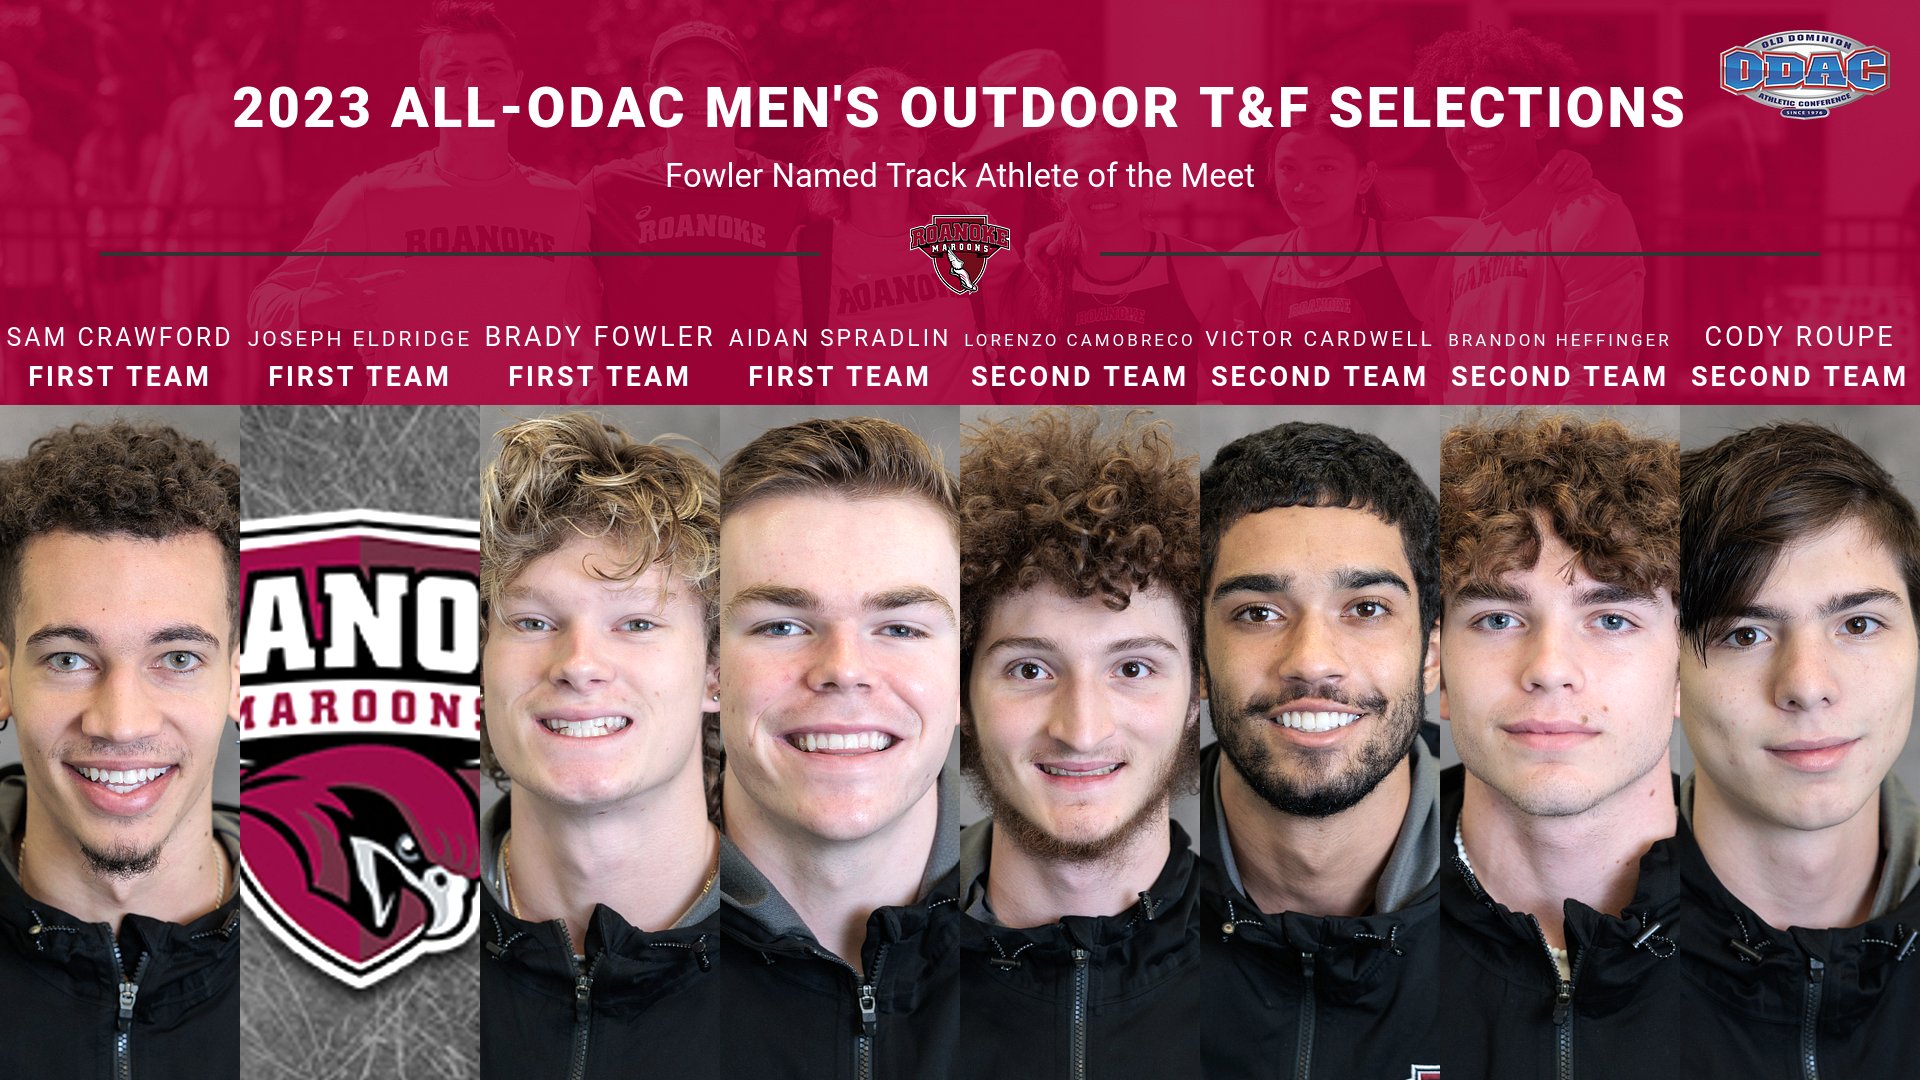 Fowler Named ODAC Track Athlete of the Meet